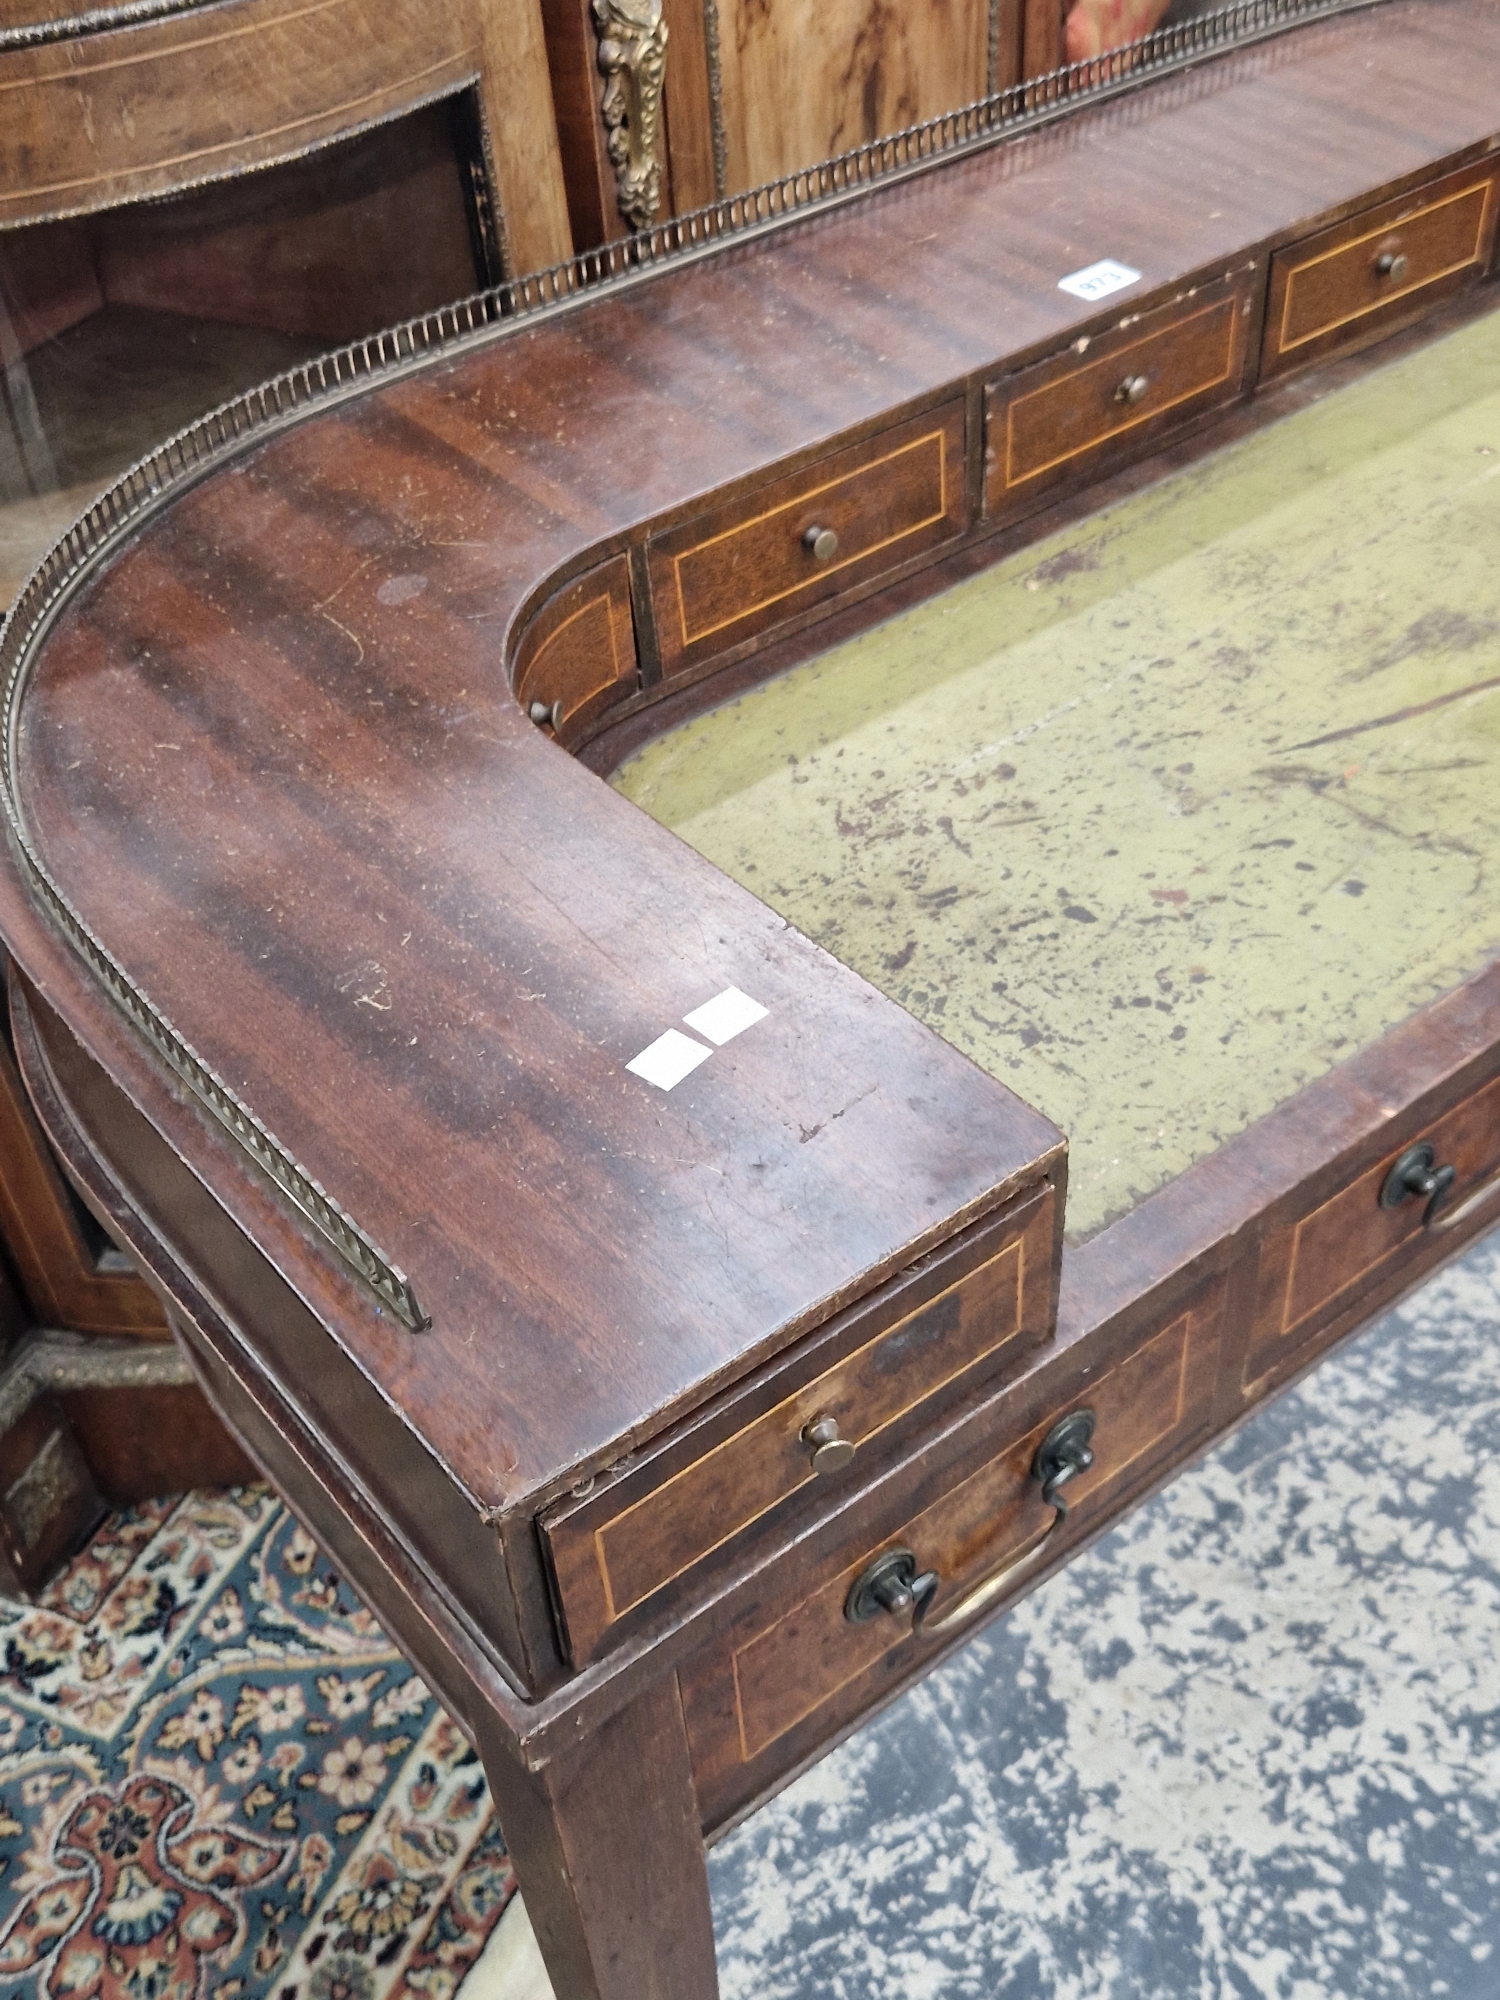 A MAHOGANY CARLTON HOUSE DESK, THE GALLERIED BACK ABOVE FIVE LINE INLAID DRAWERS BEFORE THE GREEN - Image 4 of 10